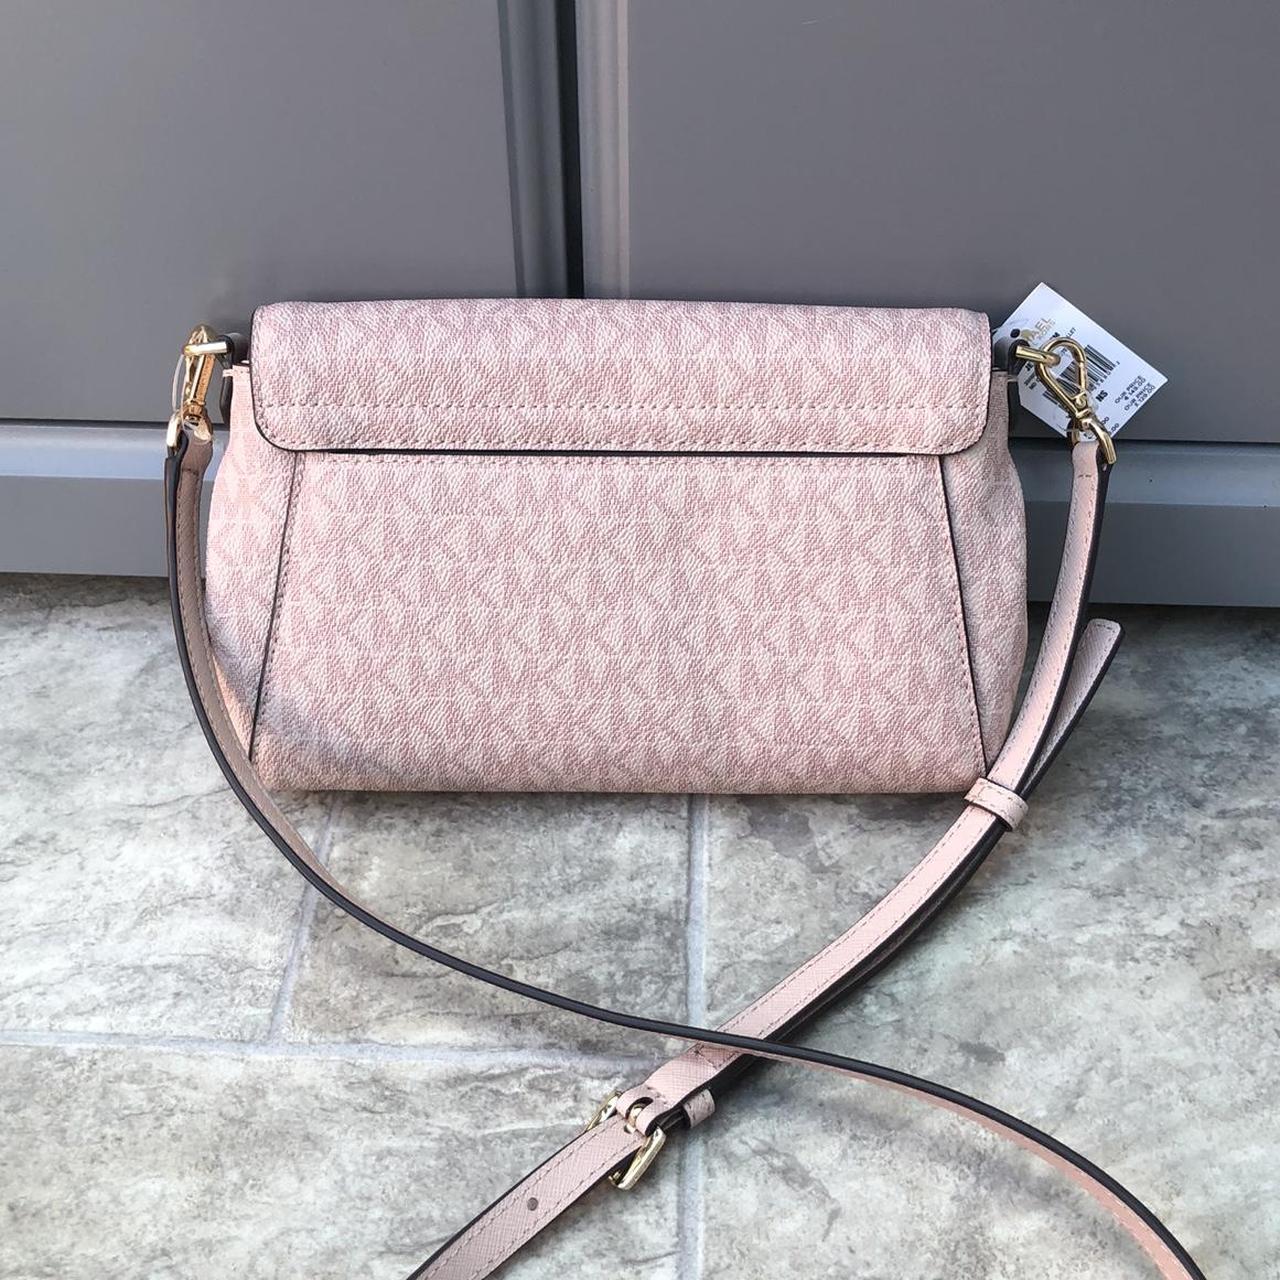 Pink and white michael kors bag used once perfect - Depop